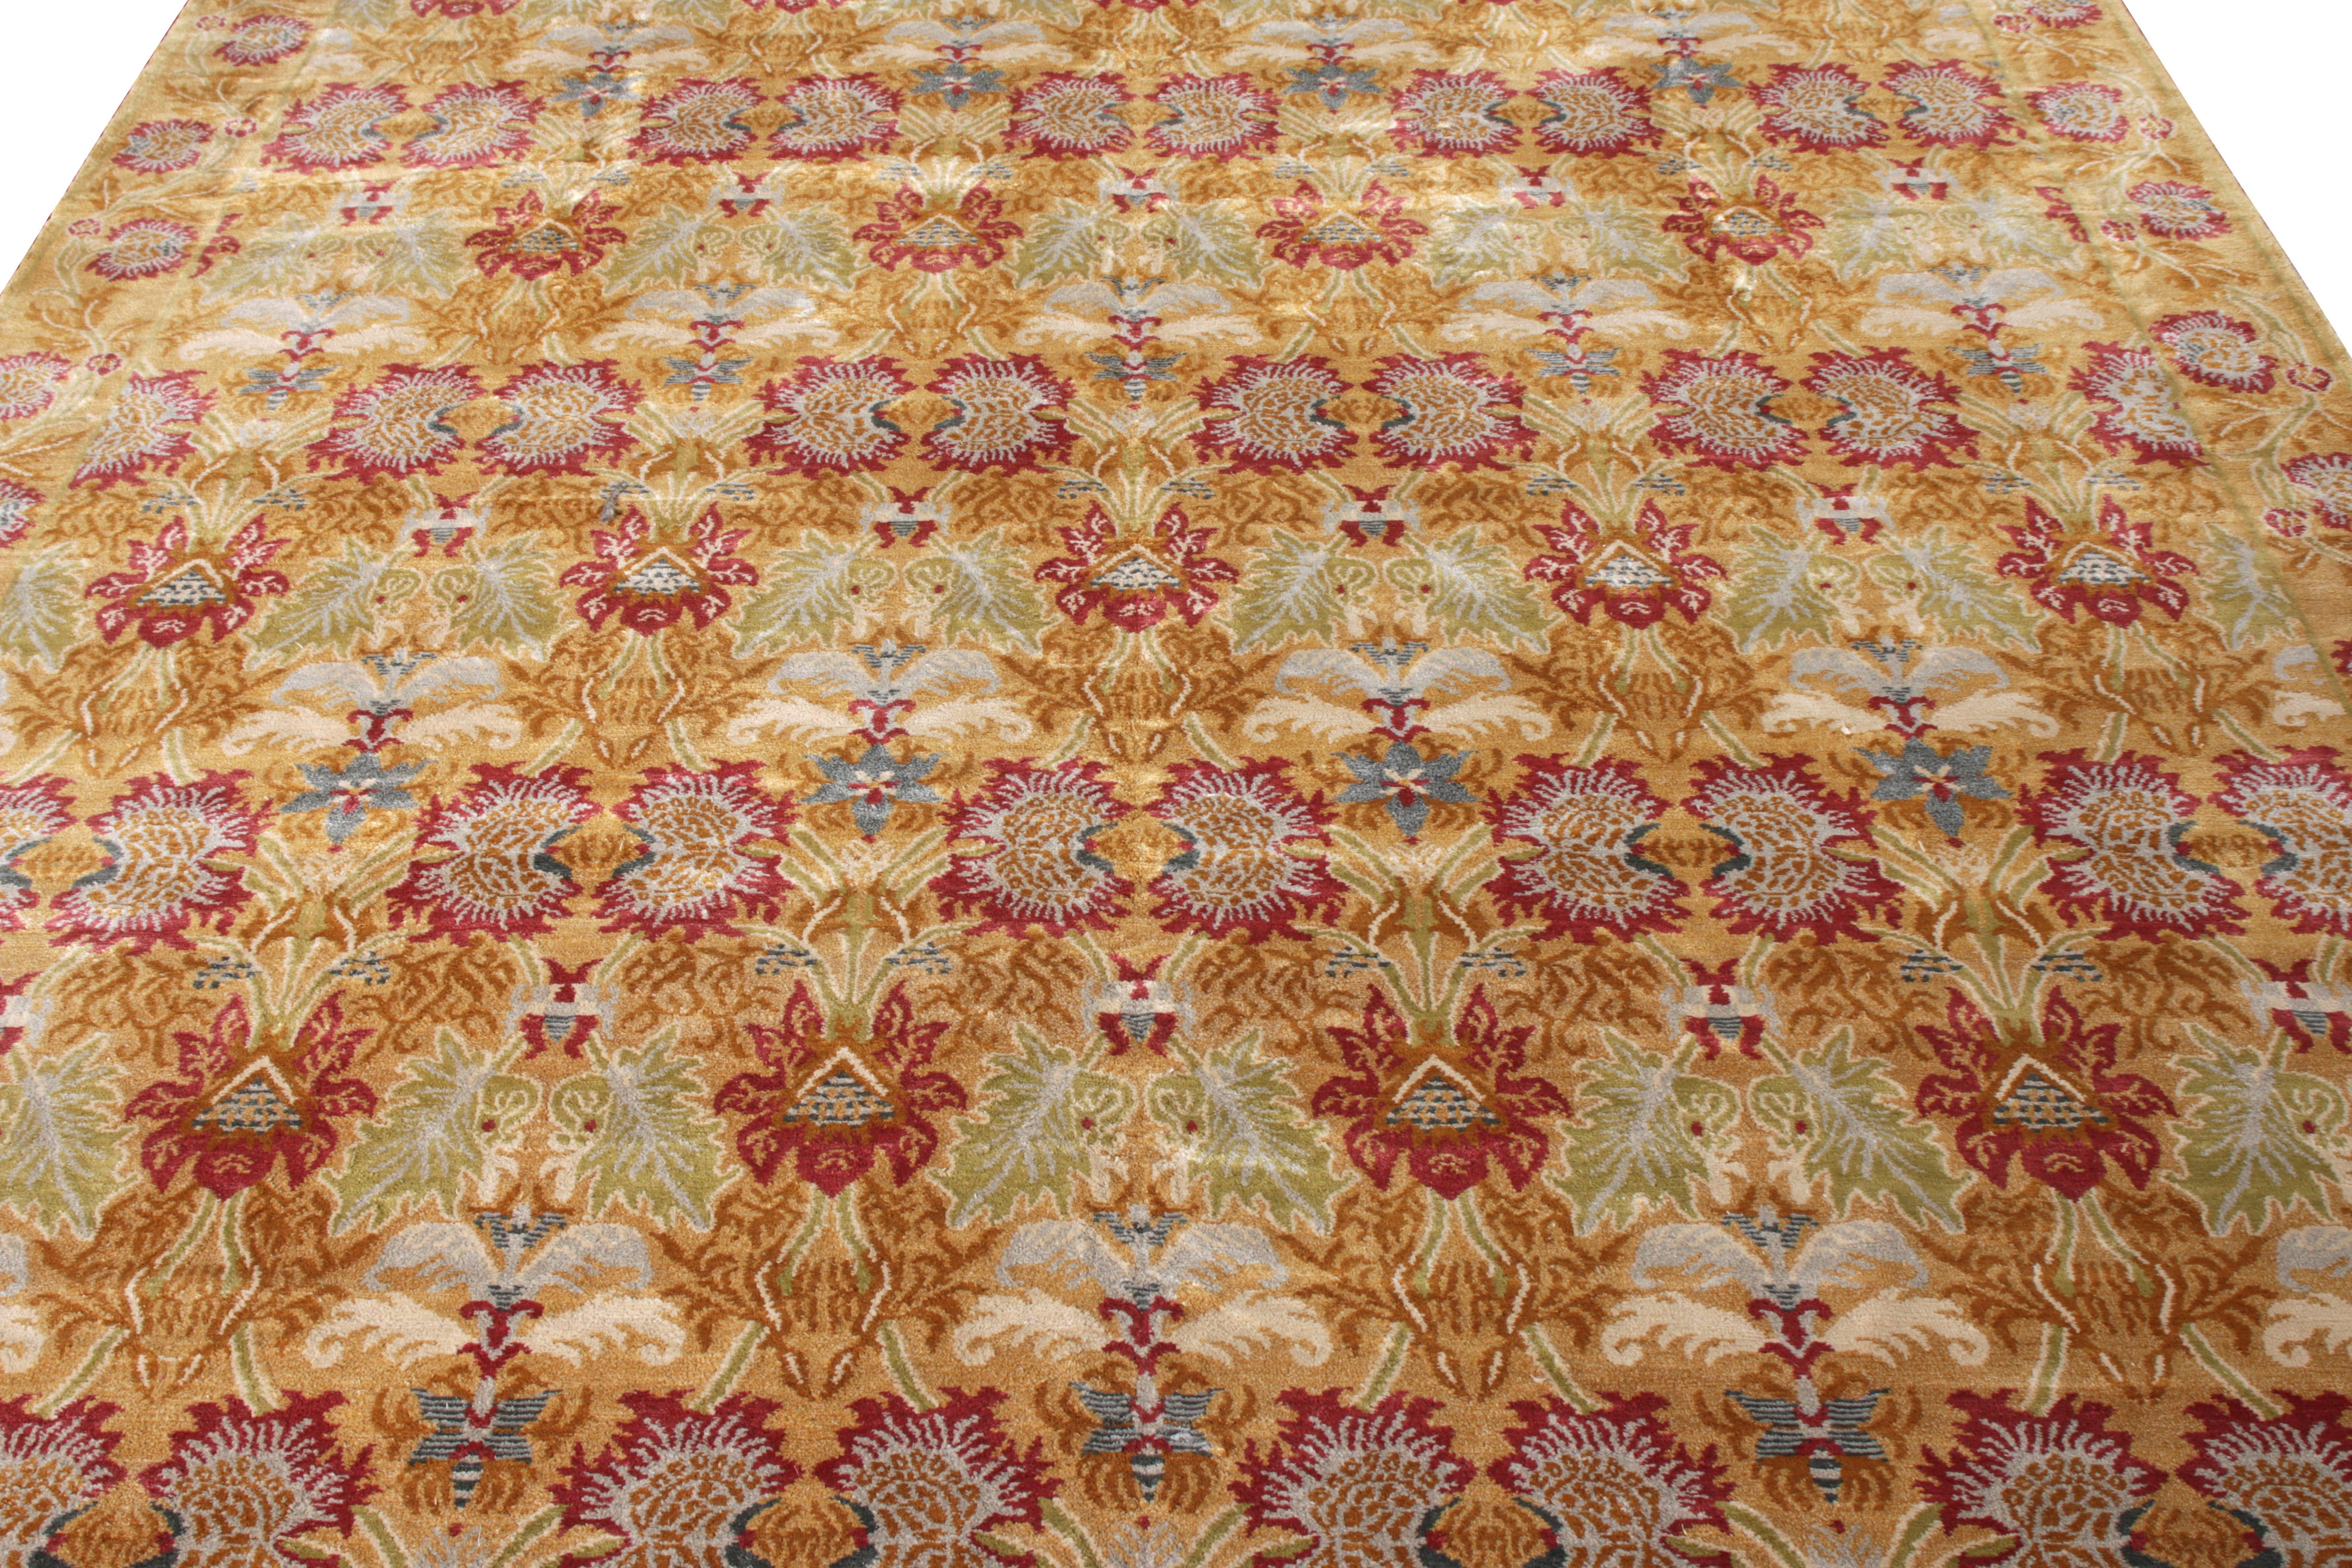 Art Deco Rug & Kilim’s European Style Rug in Gold and Red Floral Pattern For Sale